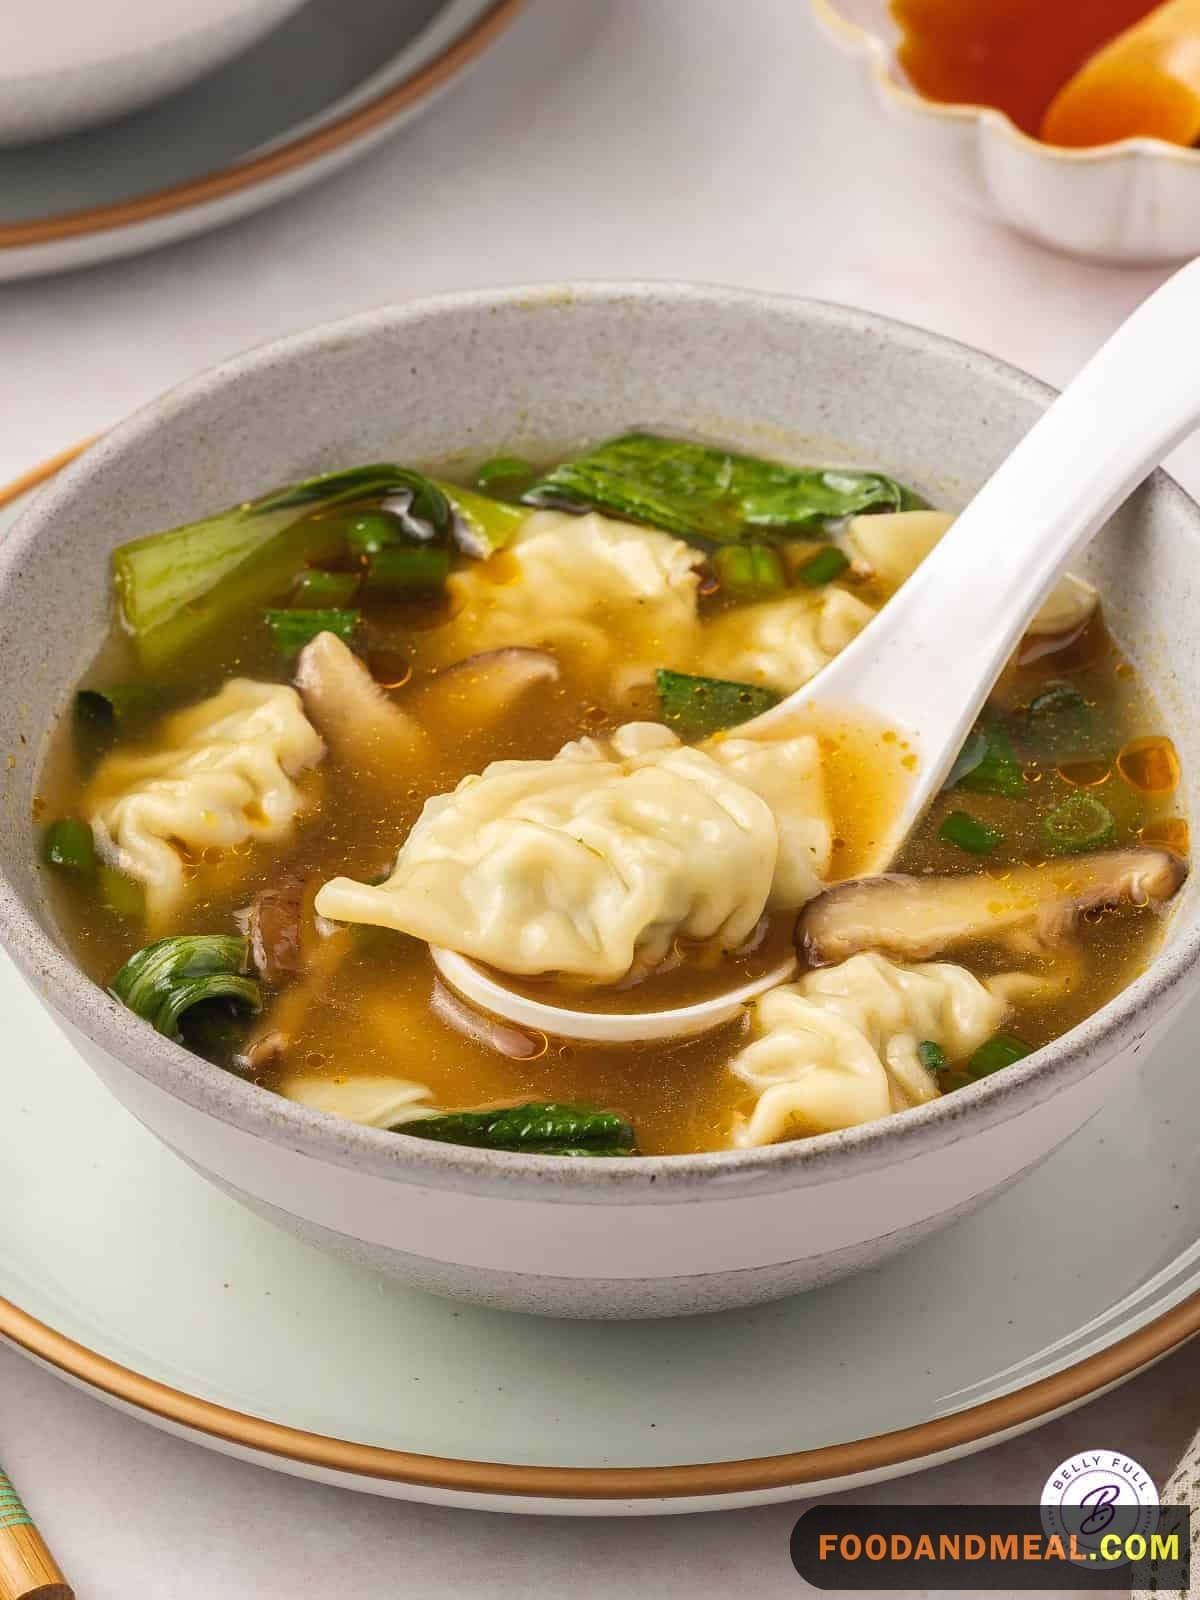 Dumpling Delight Bite Into These Tender Dumplings Filled With A Pork And Shrimp Mixture And Savor The Rich Broth. Wonton Soup Satisfaction.